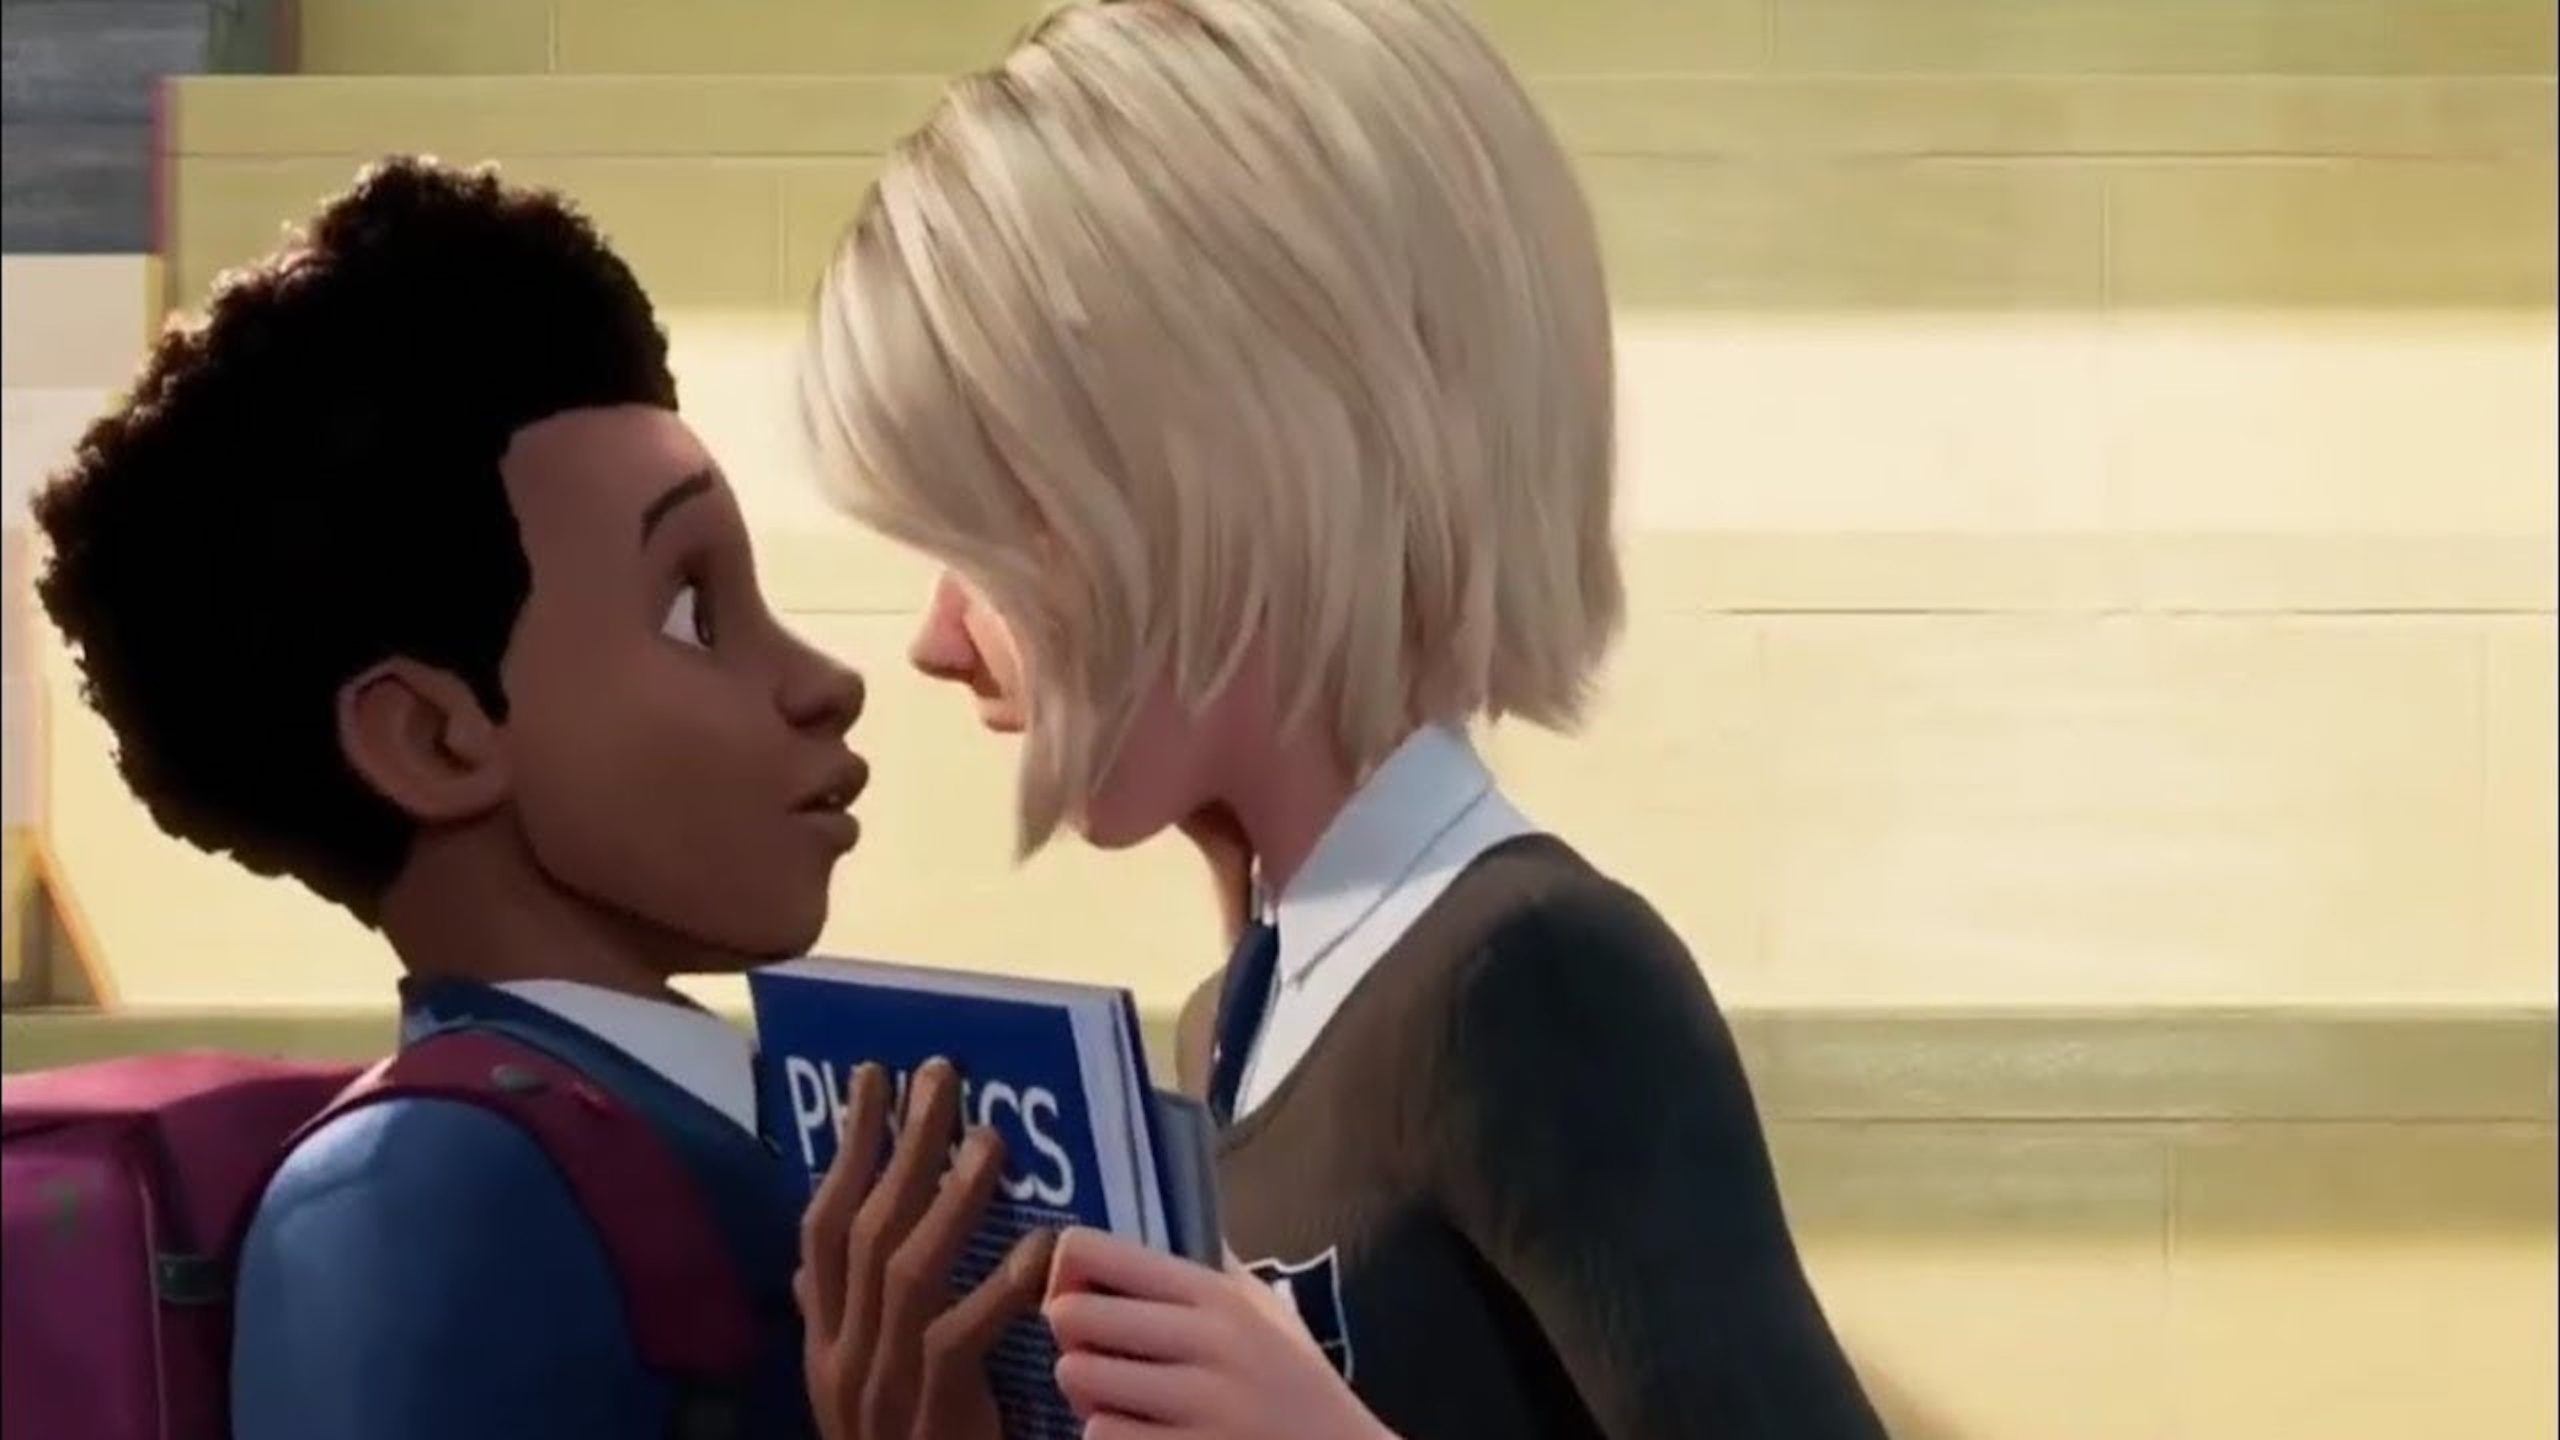 This image is from Spider-Man: Into the Spider-Verse, where Miles "spidey" stick hands got stuck in Gwen's hair. 